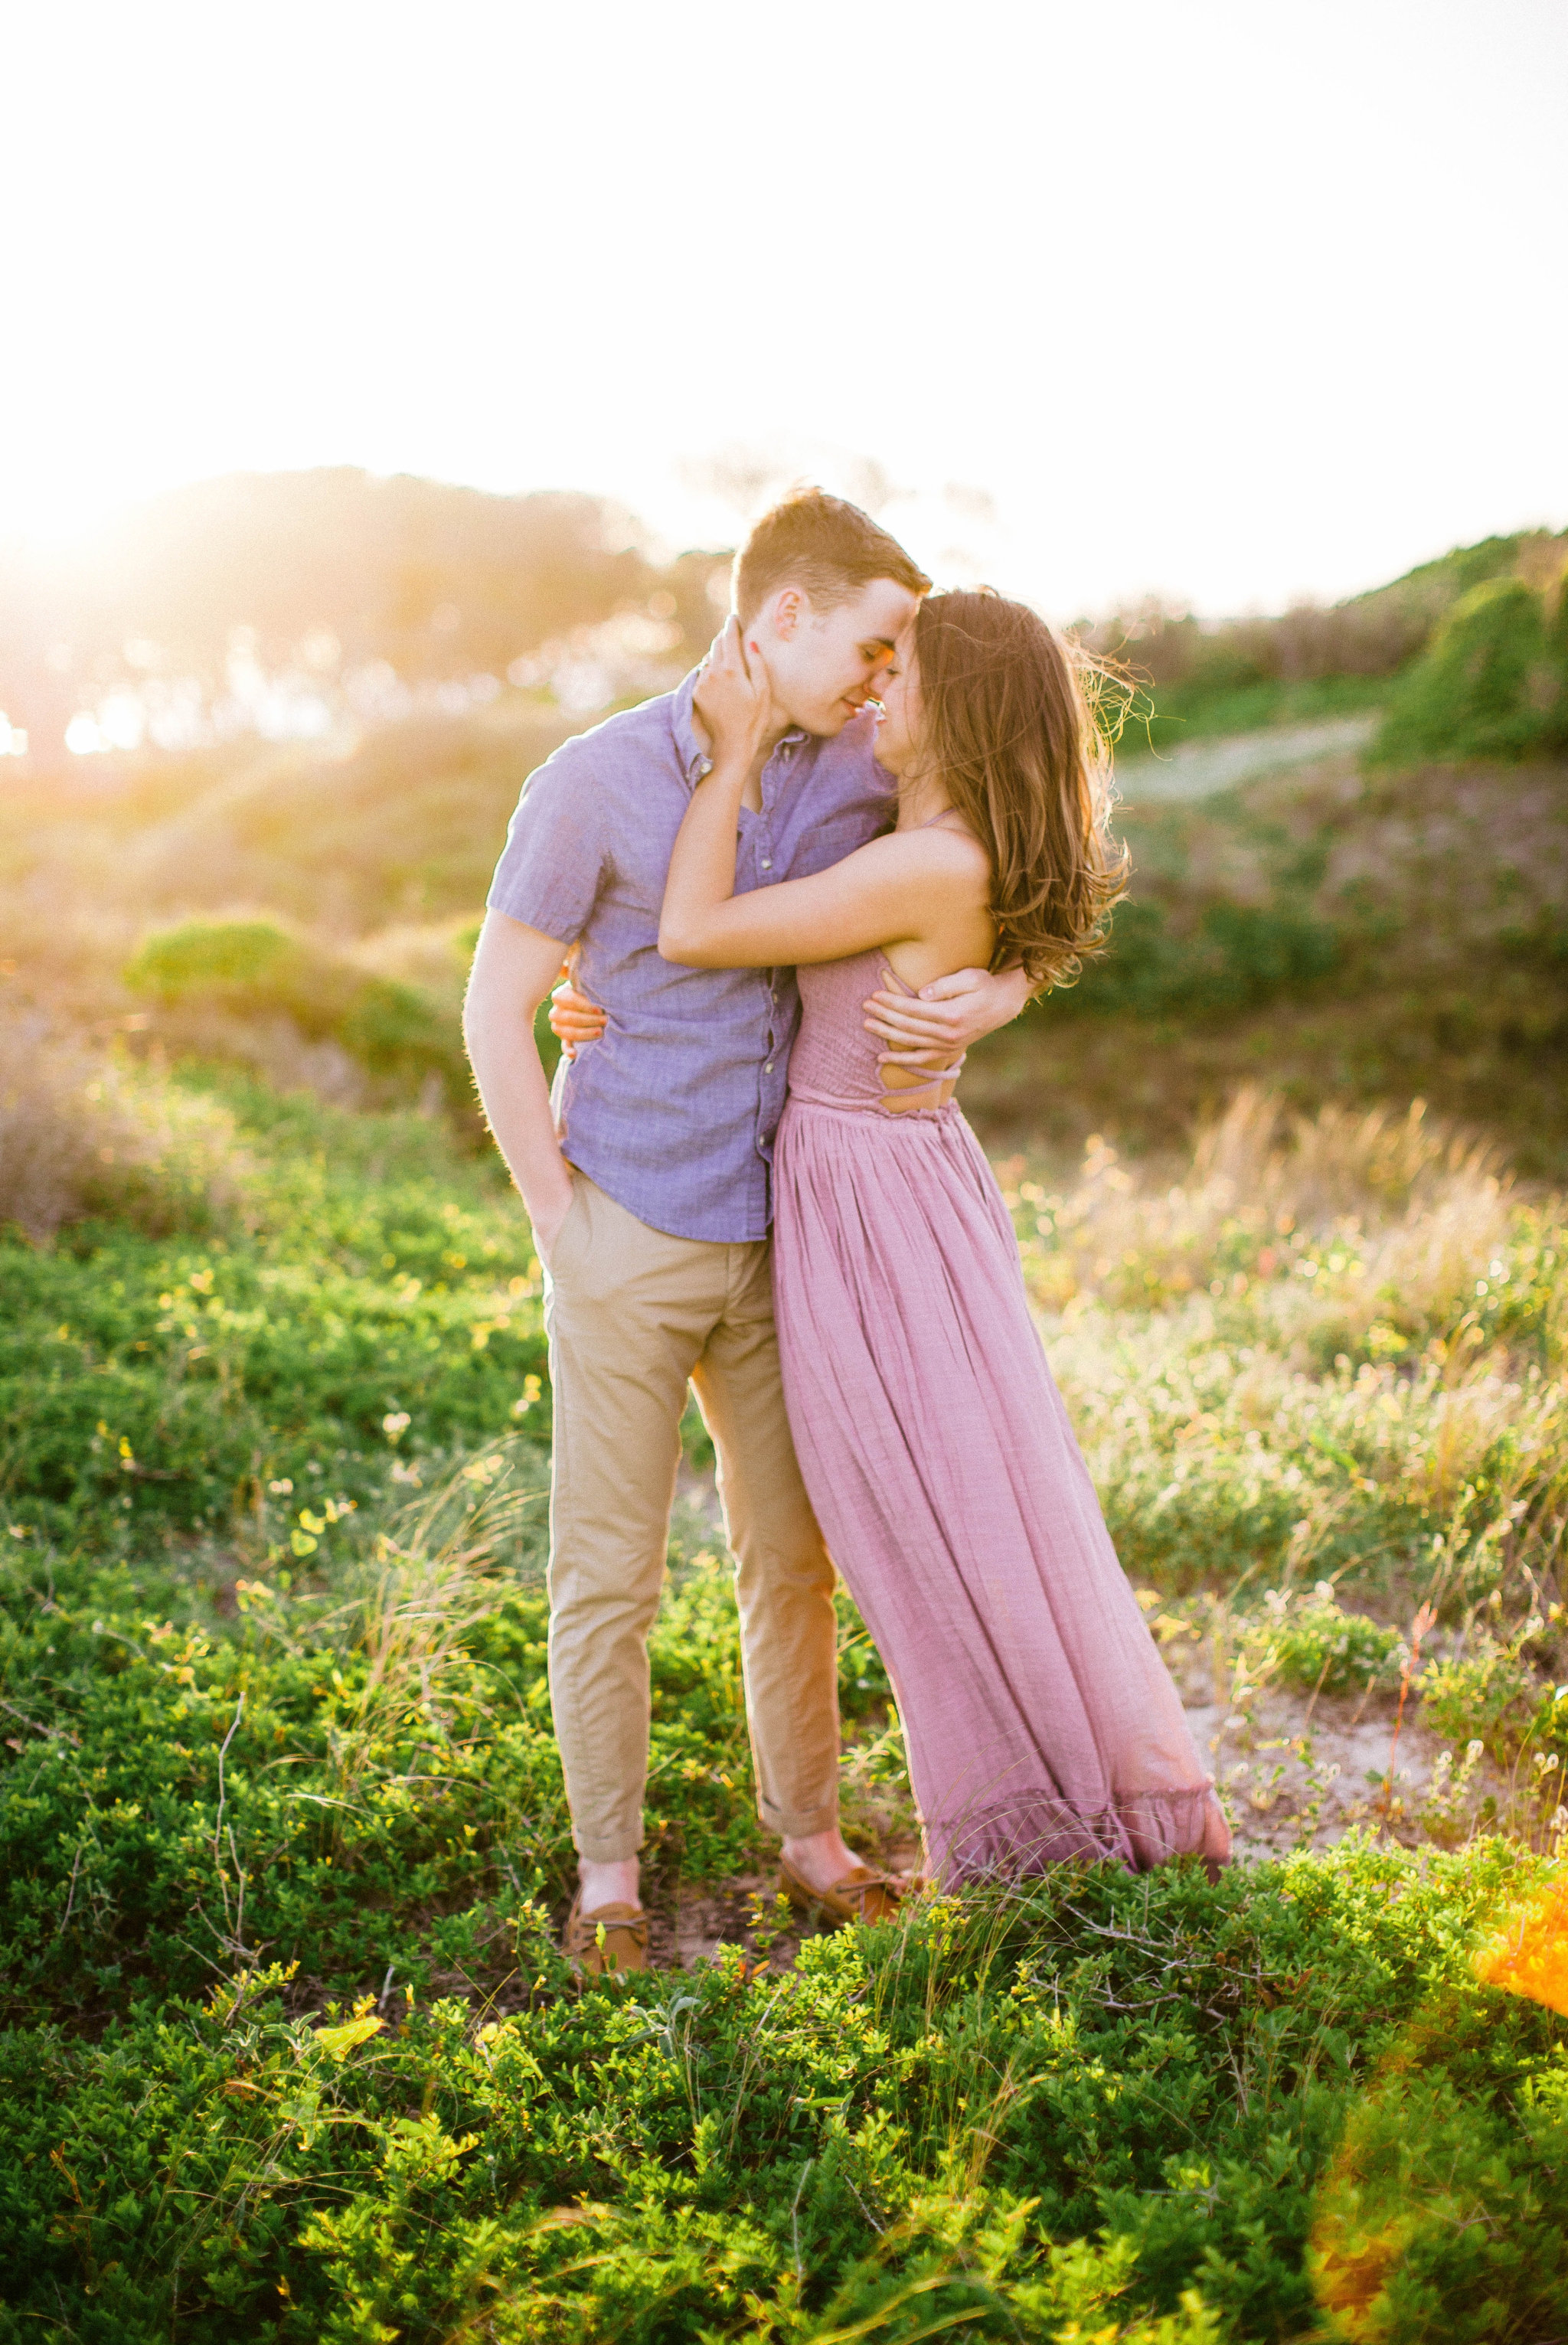  couple kissing in front of lush green dunes and hills with the sunset behind them - Woman is in a flowy pastel maxi dress - outdoor golden light session - engagement photographer in honolulu, oahu, hawaii - johanna dye photography 